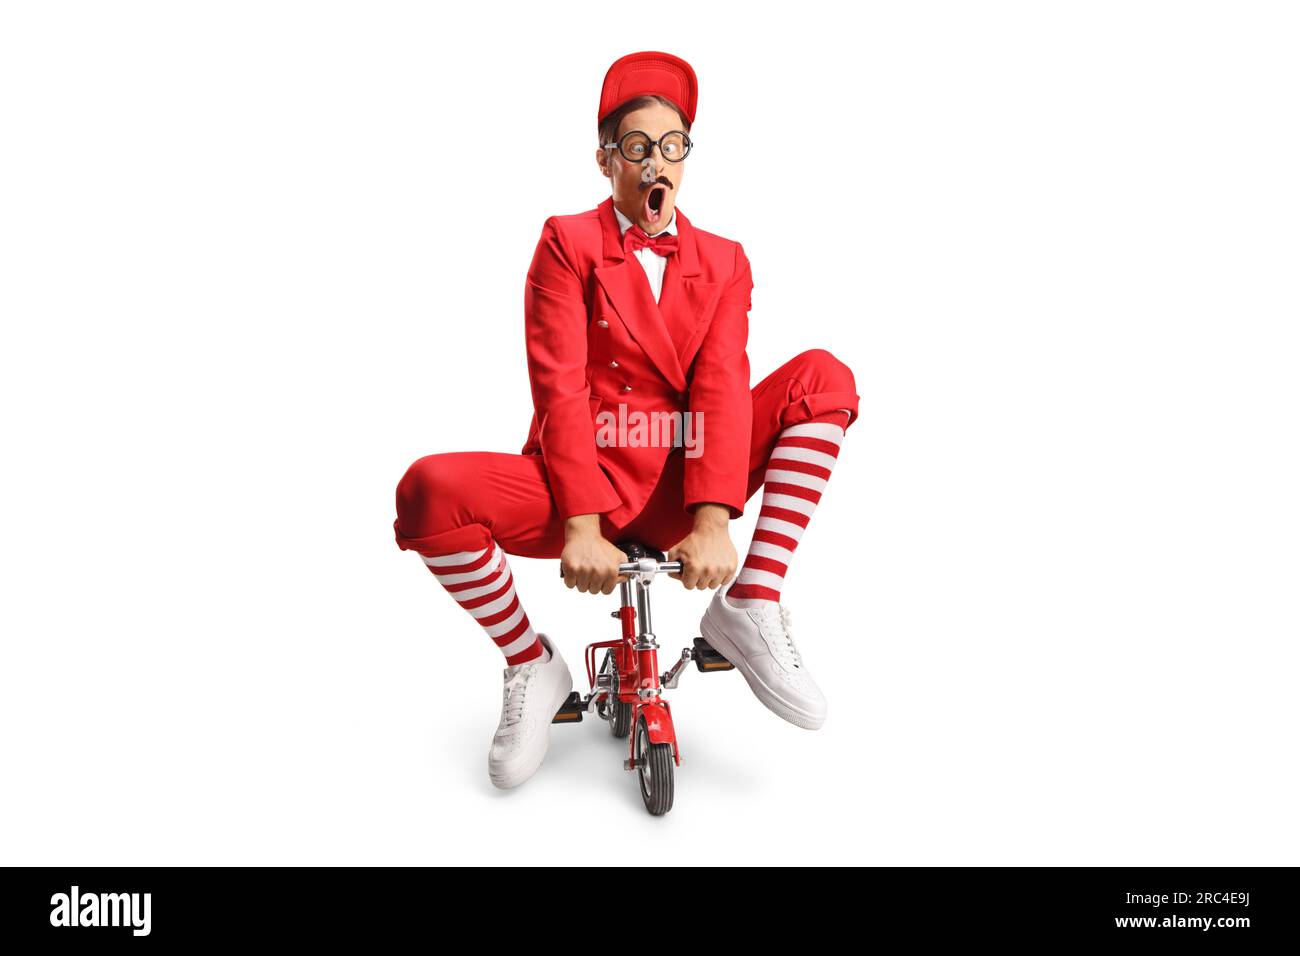 Funny entertainer riding a small red bike isolated on white background Stock Photo